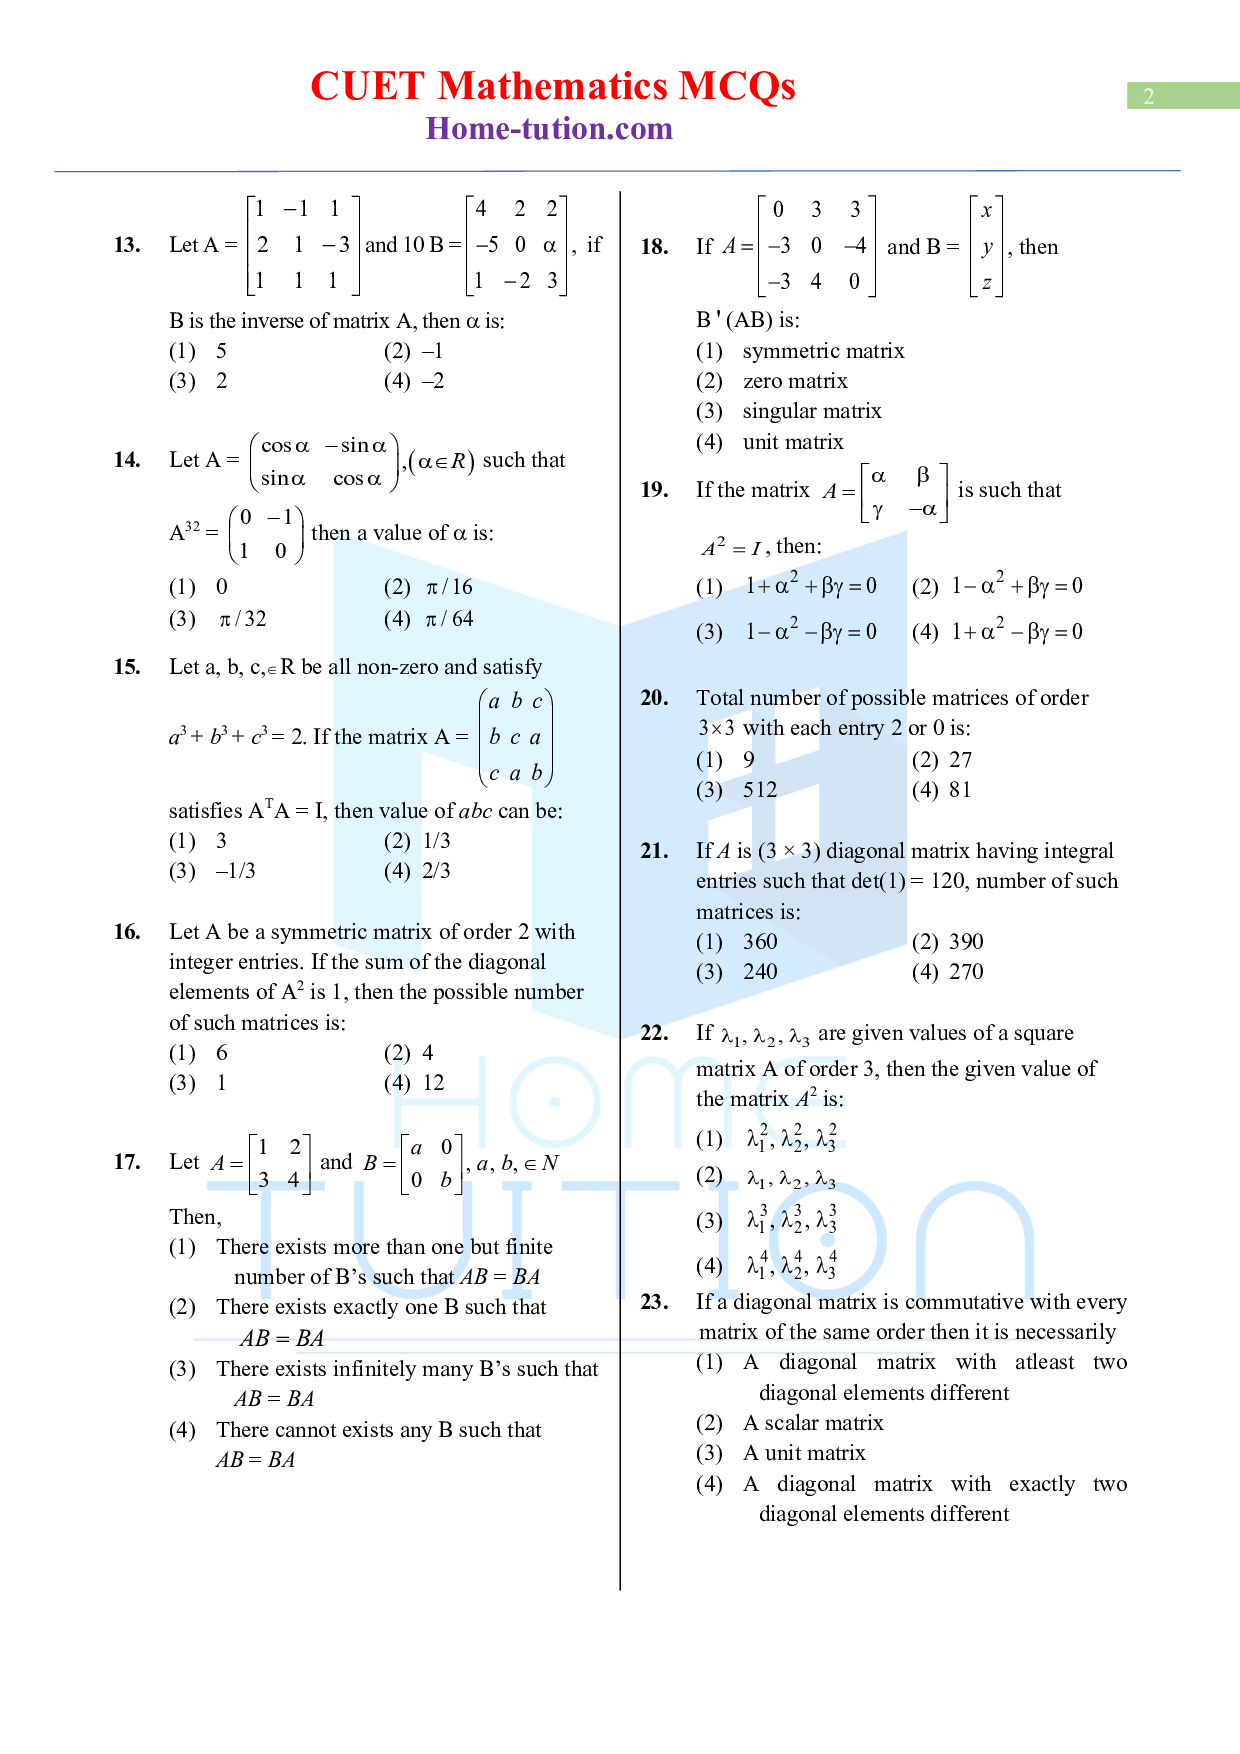 CUET MCQ Questions For Maths Chapter-10 Matrices